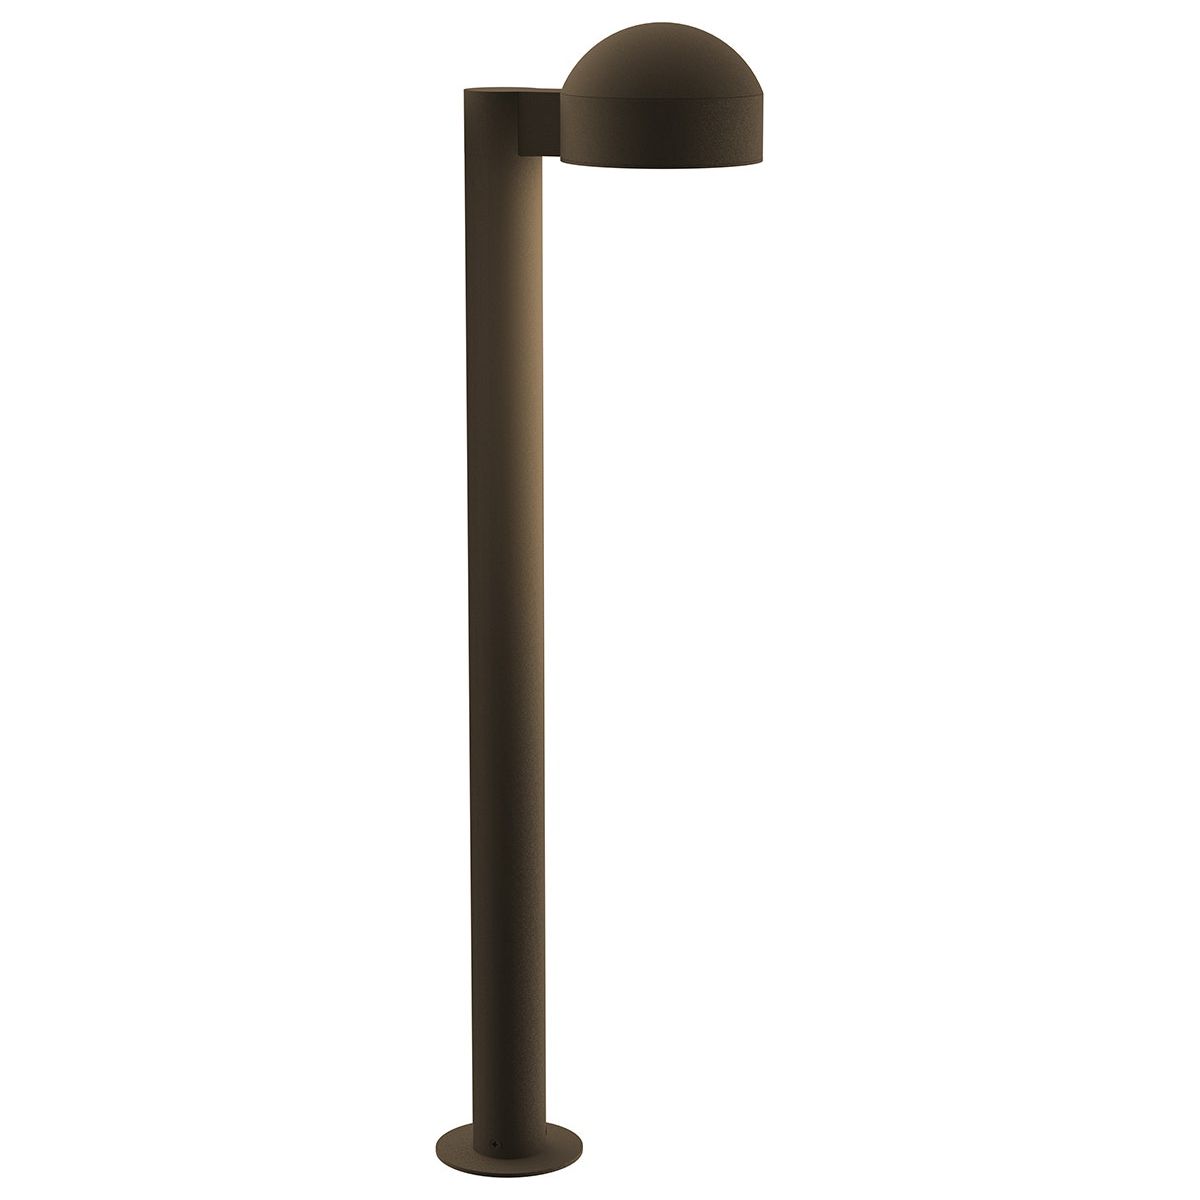 REALS 28" LED Bollard with Dome Cap and Plate Lens